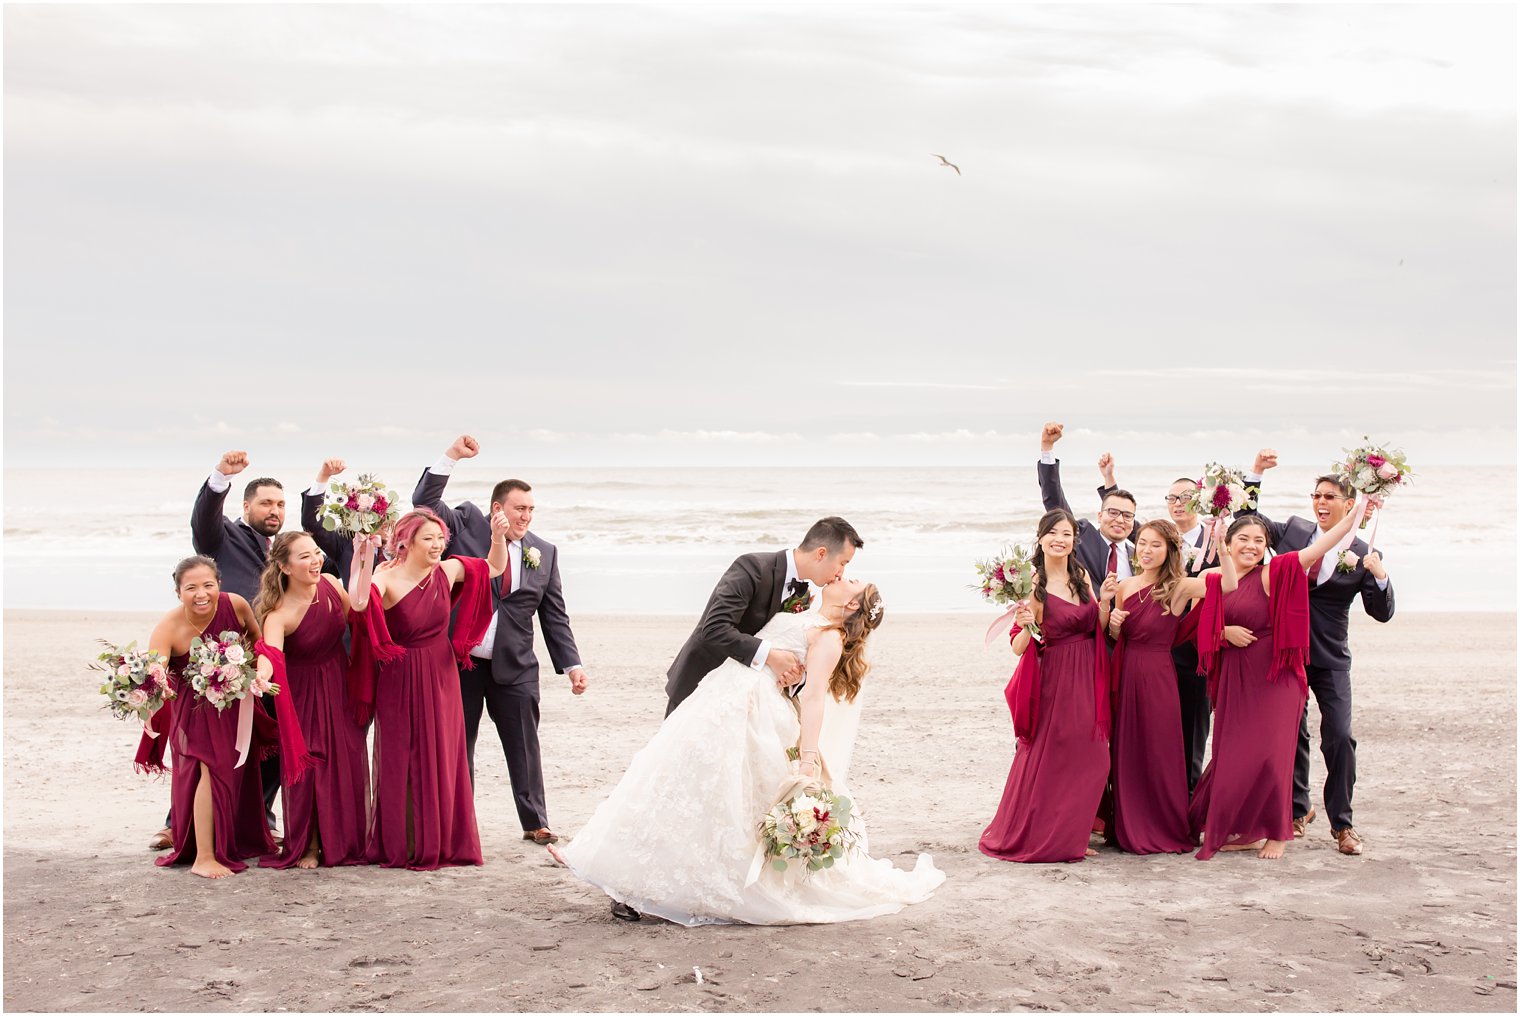 Bridal Party taking fun photos on the beach in Atlantic City